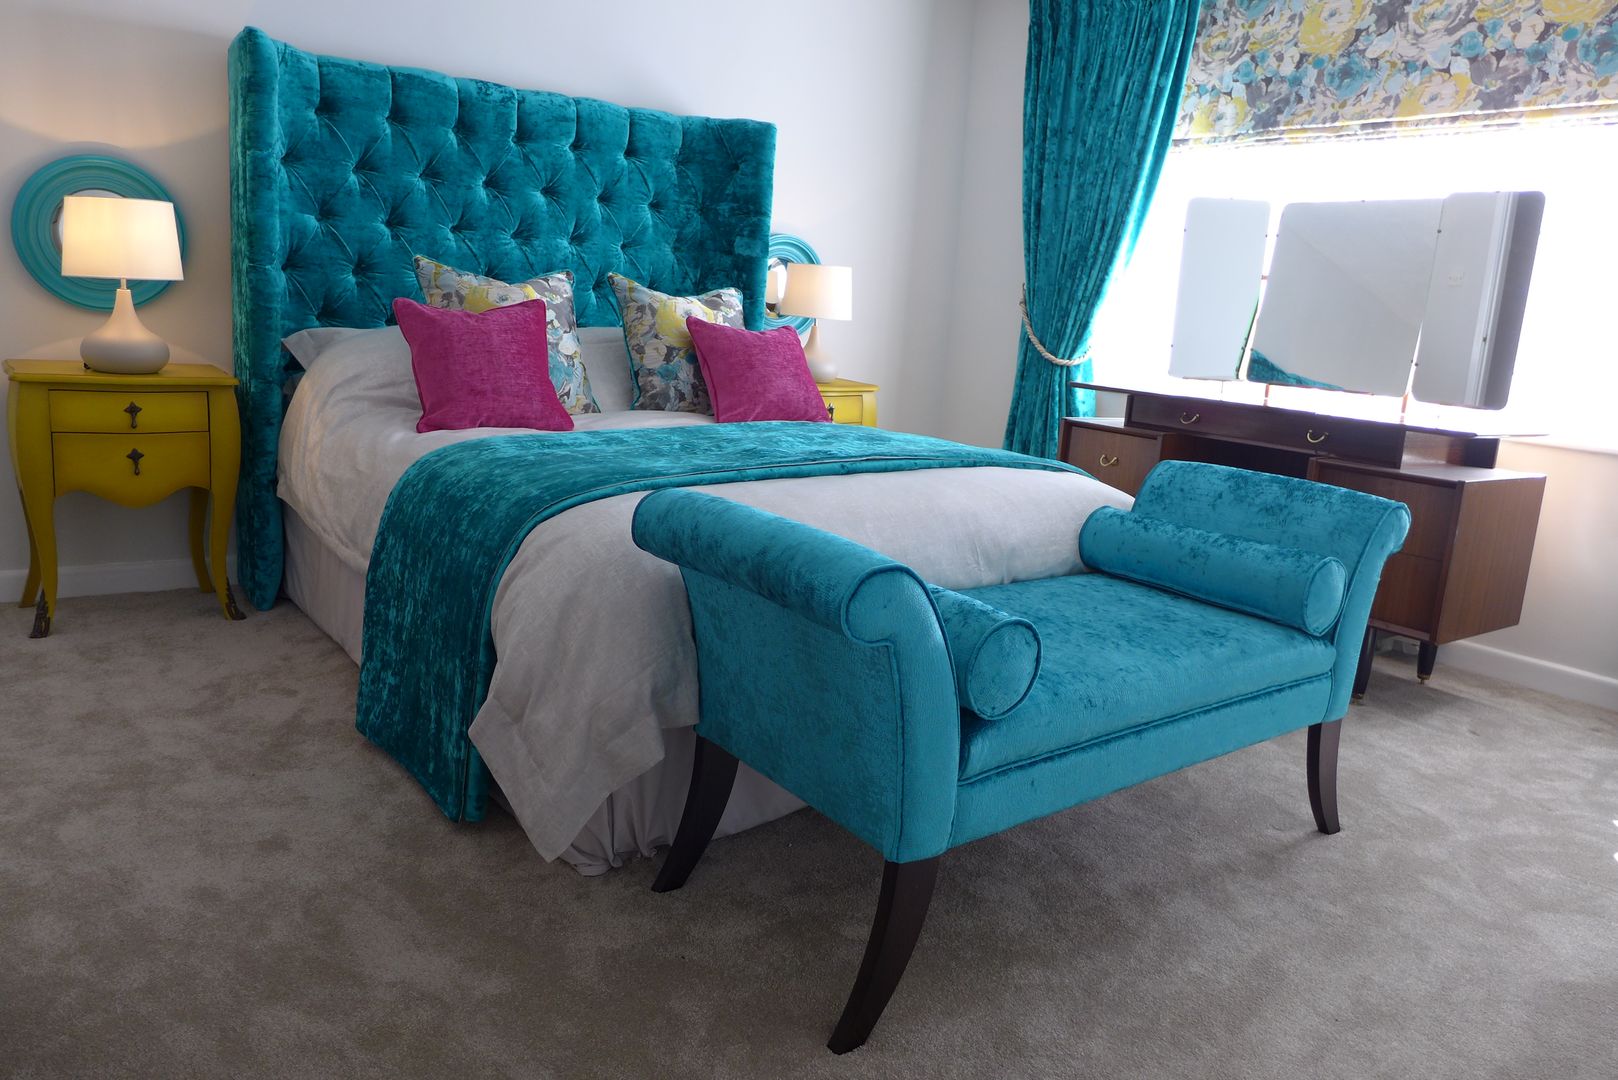 hotel style bedroom Style Within غرفة نوم bed end chaise,blue velvet,dress curtains,roman blind,pink accents,velvet headboard,fabric headboard,boutique bedroom,hotel style bedroom